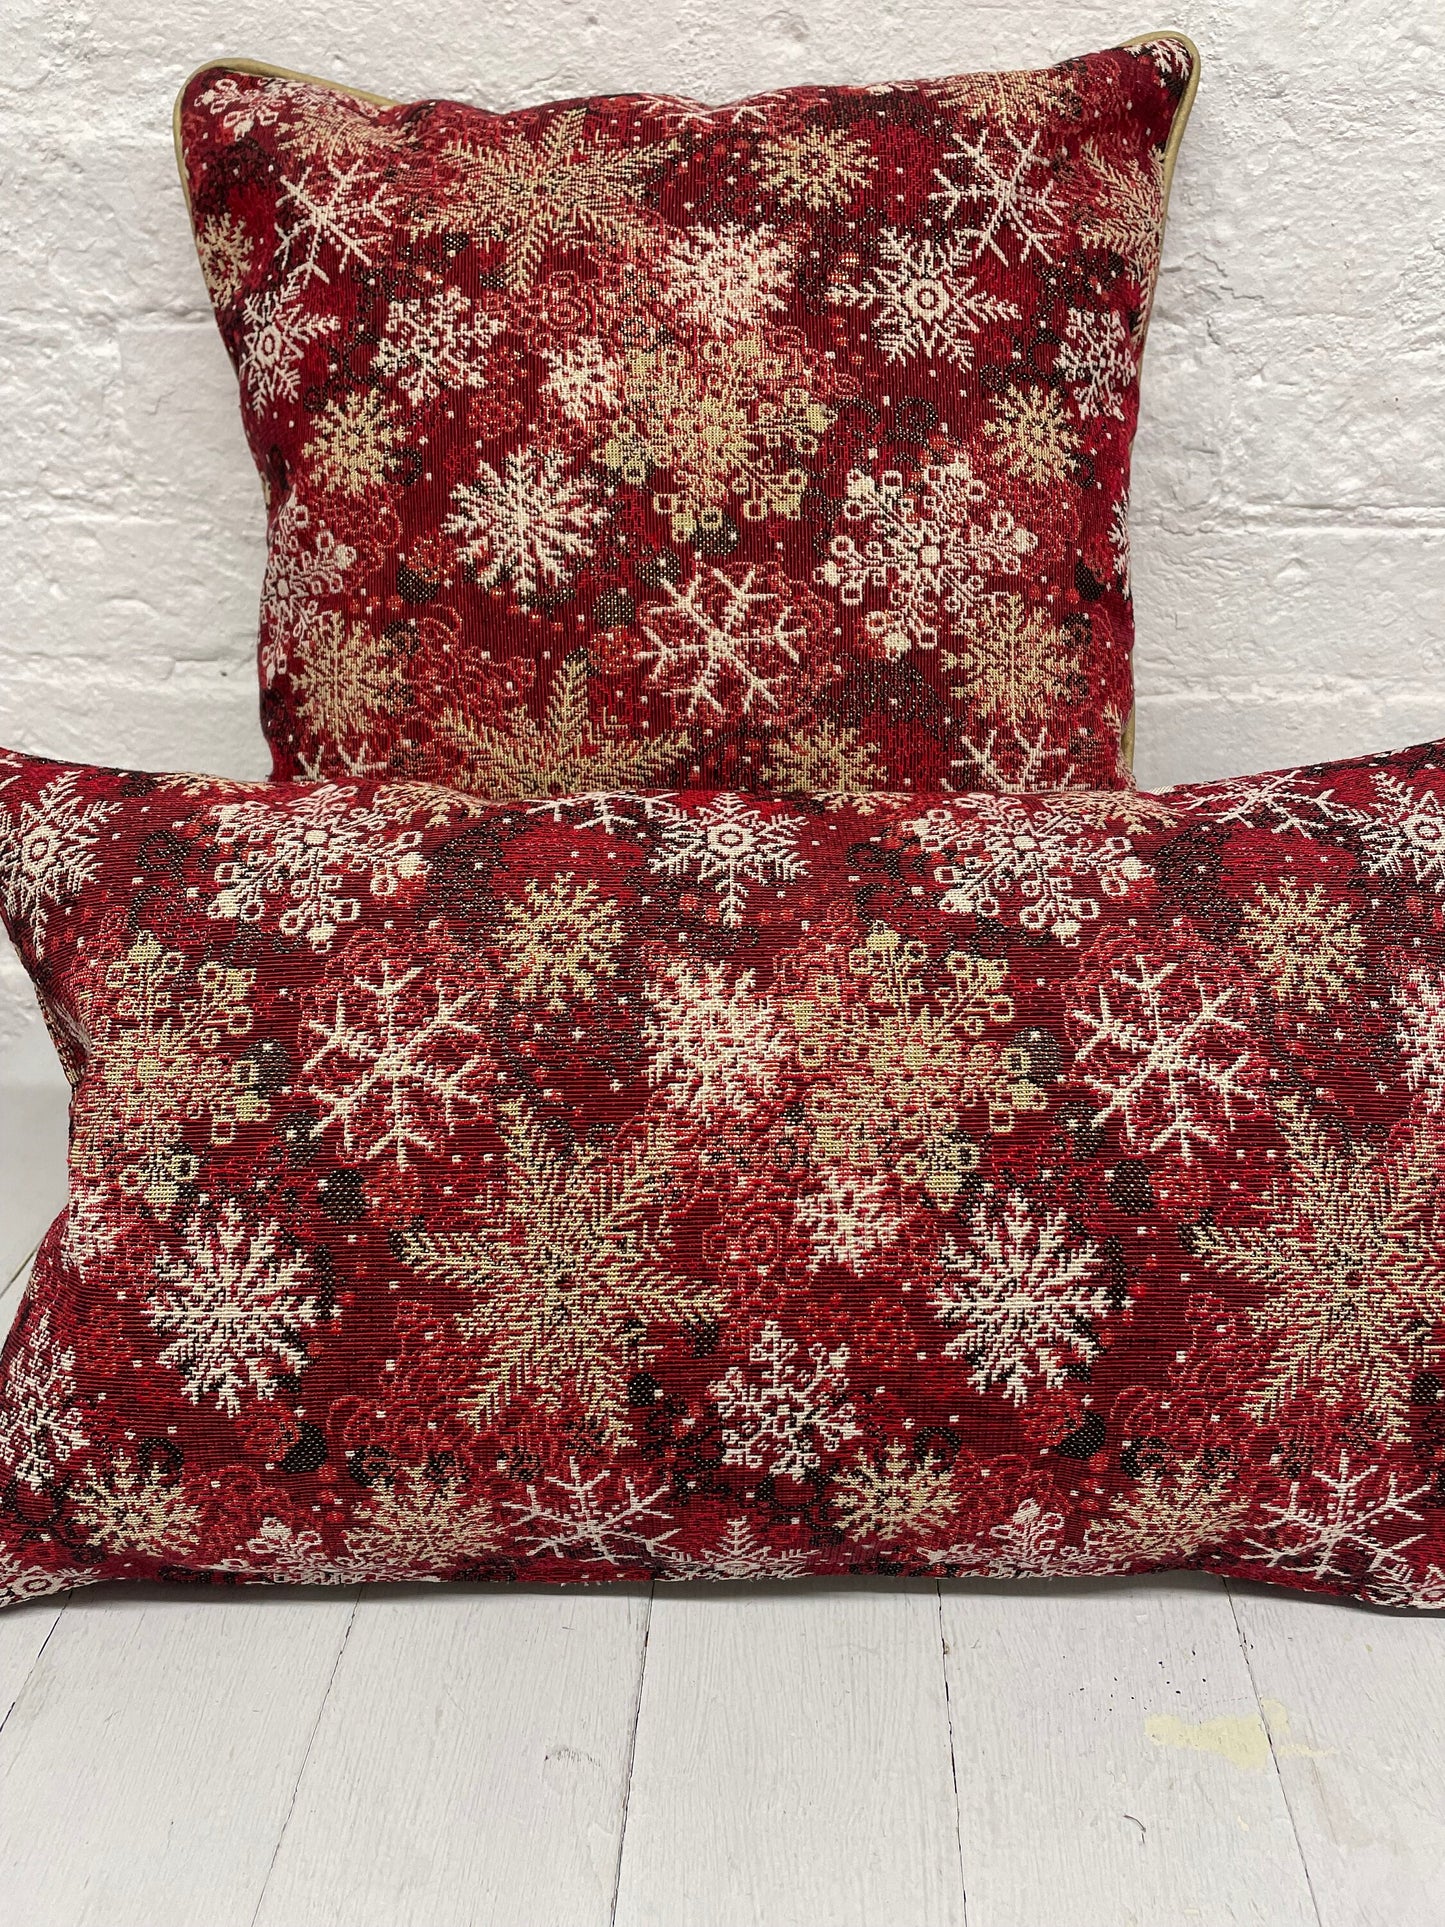 Snowflake Cushion with gold piping- Red and Gold Luxe Tapestry fabric